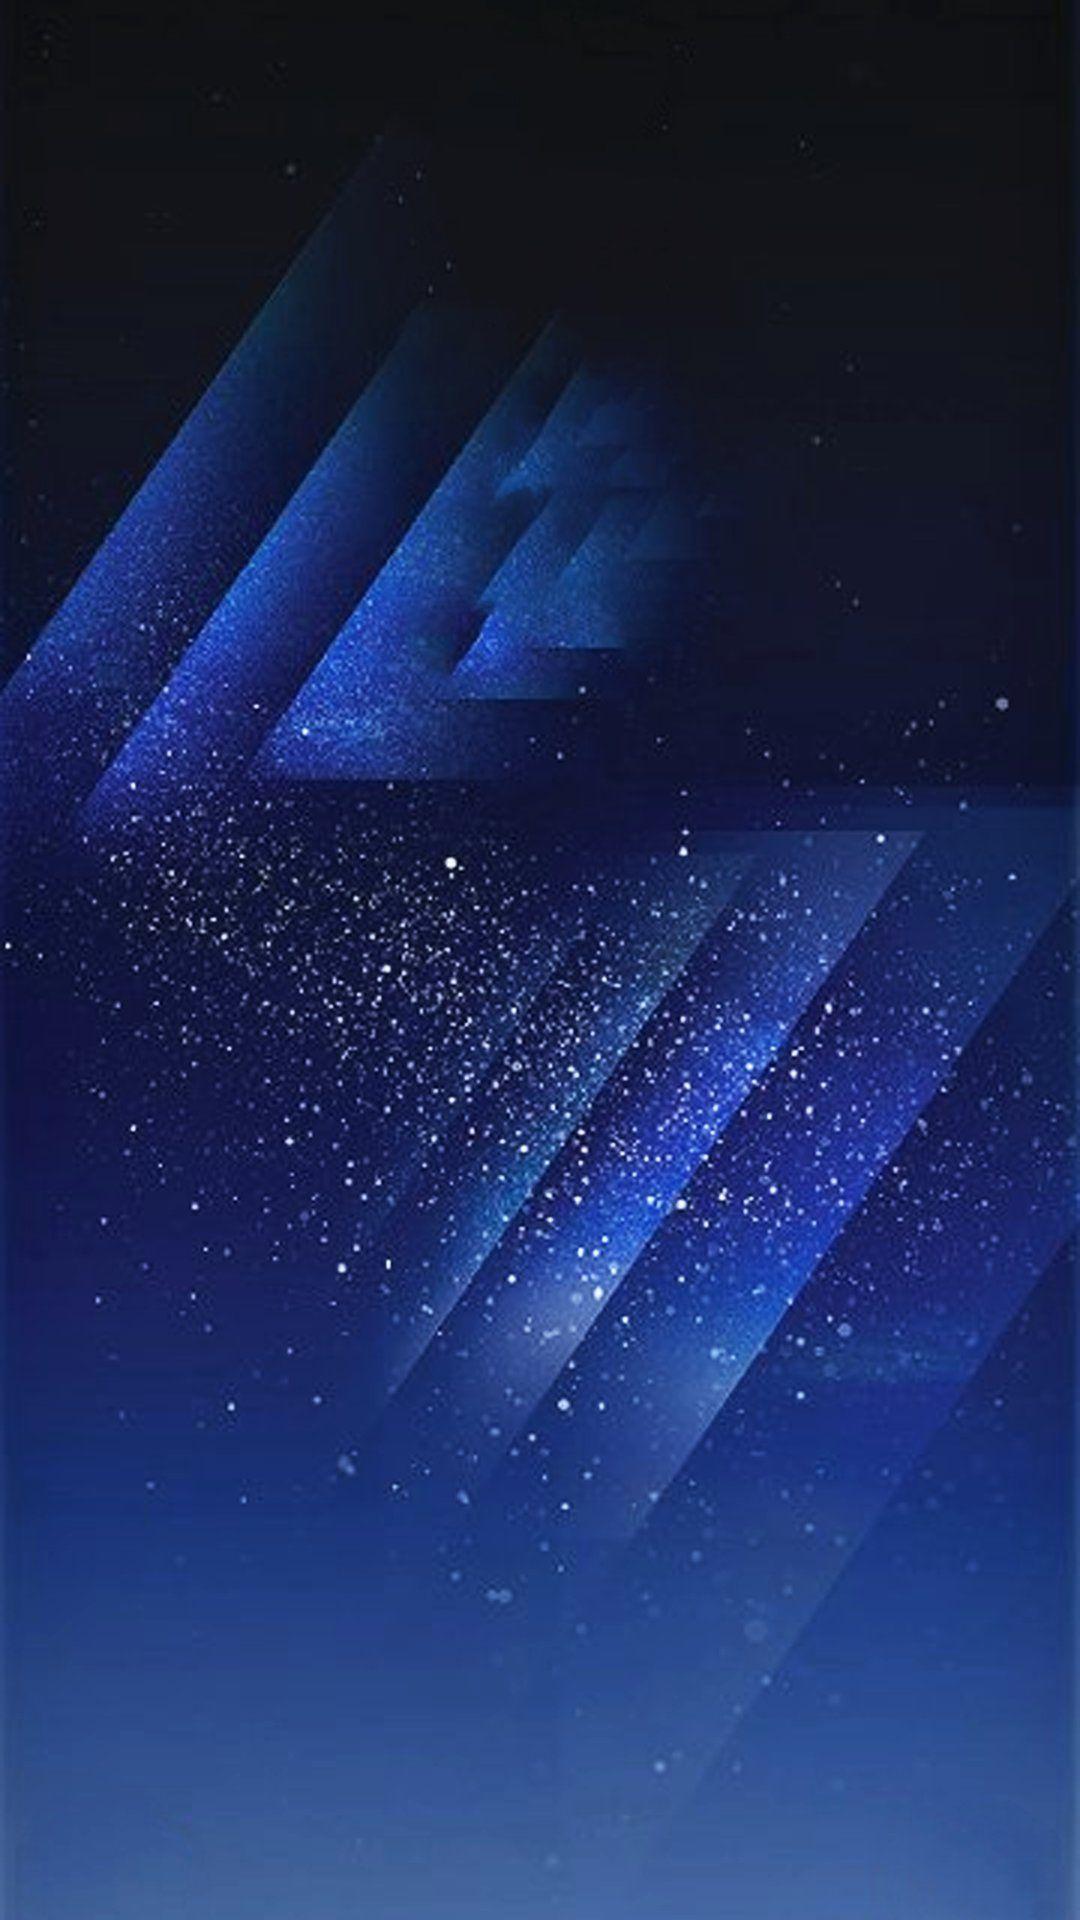 Samsung Galaxy S8 stock wallpaper are here, or are they